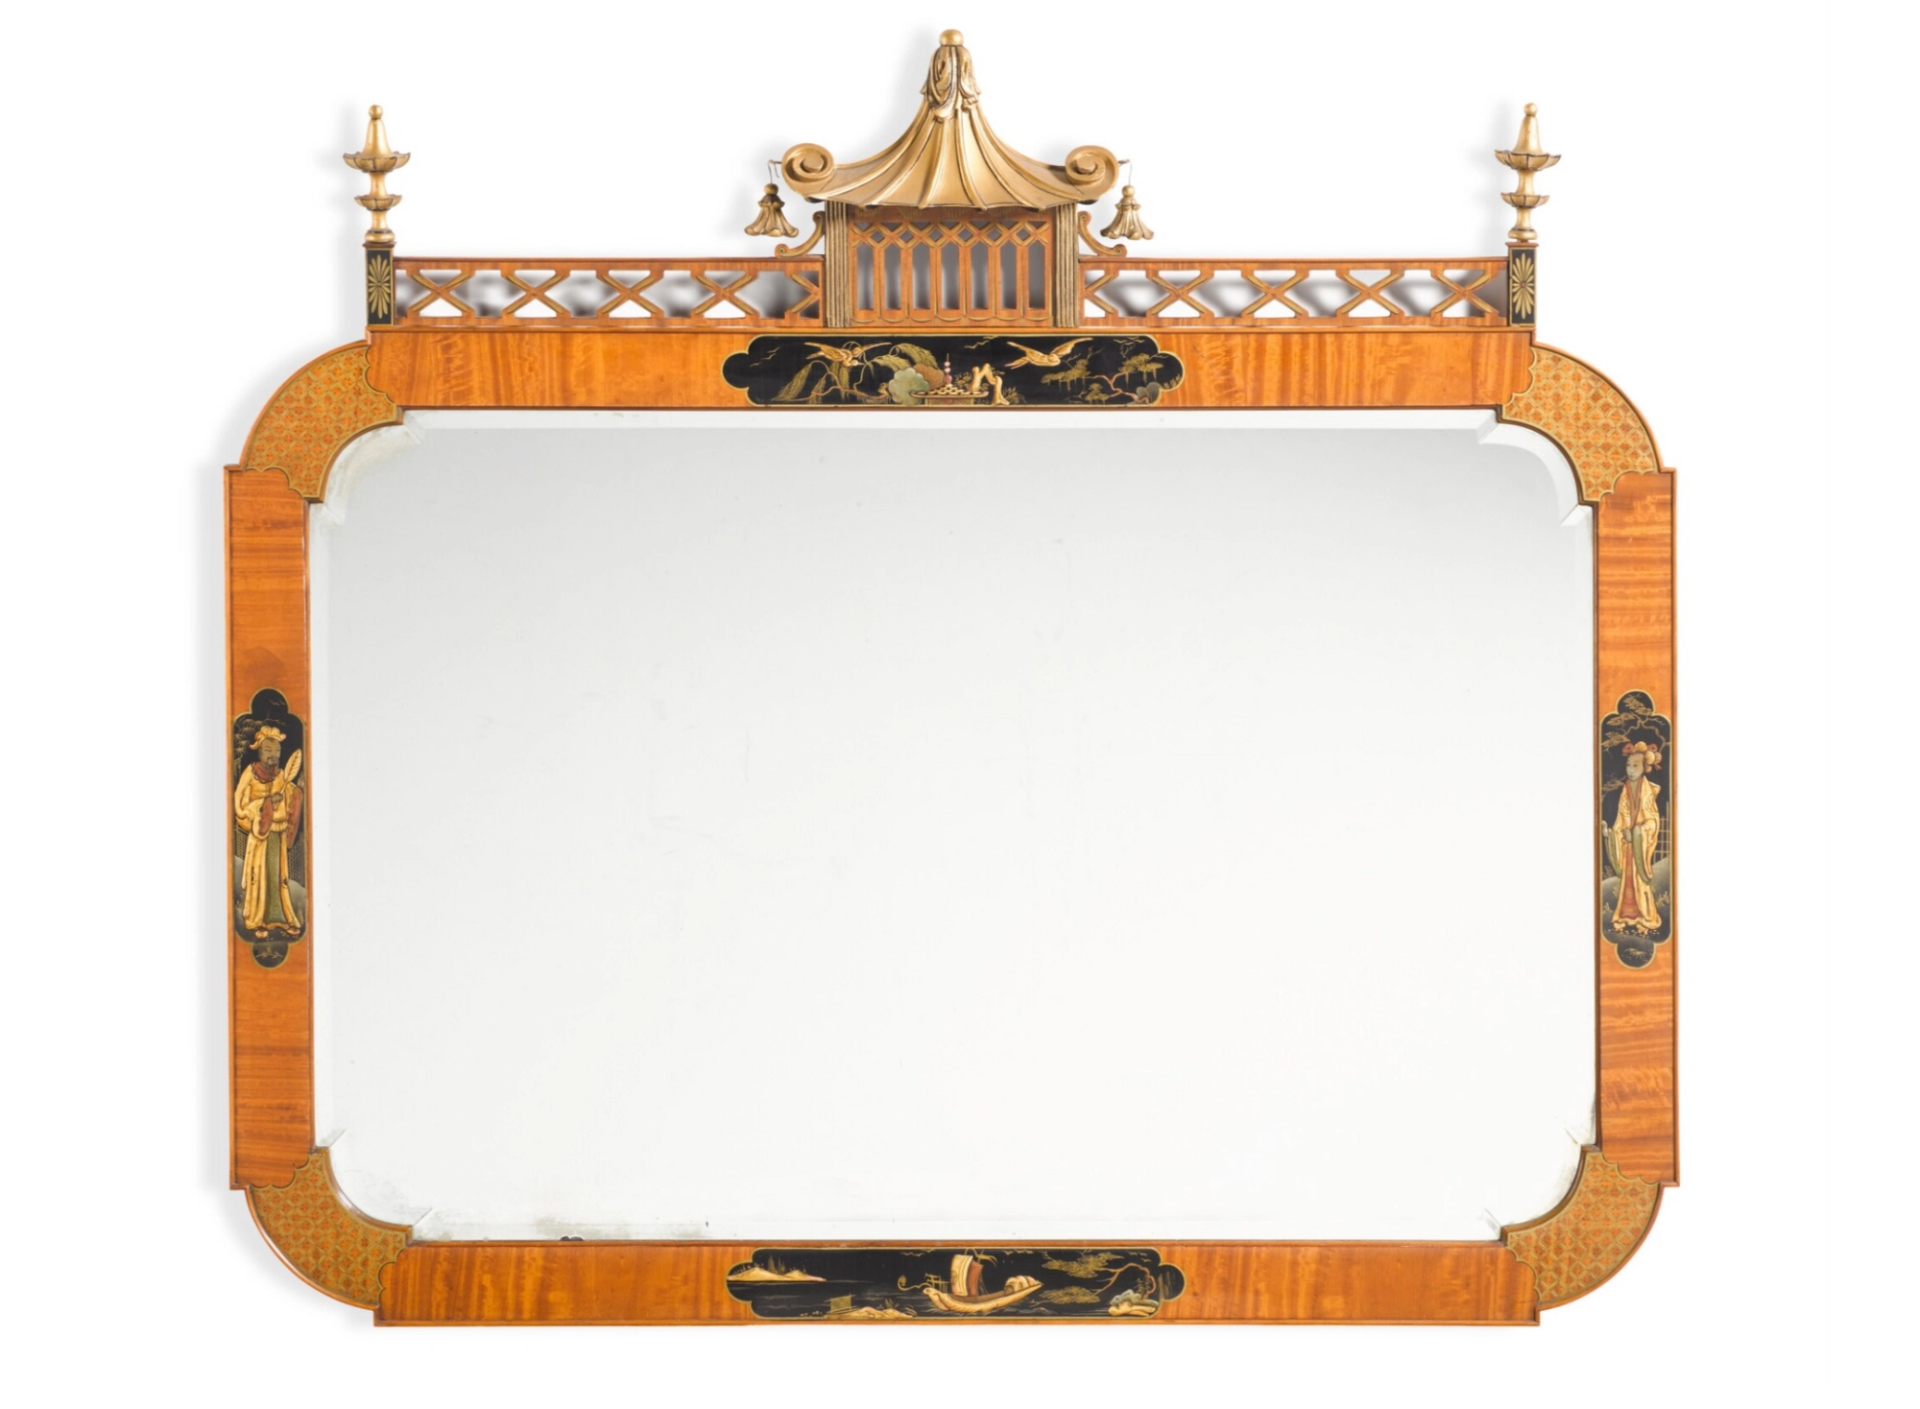 Gilt and black japanned satinwood mirror, with Japanese motifs, once owned by Freddie Mercury.